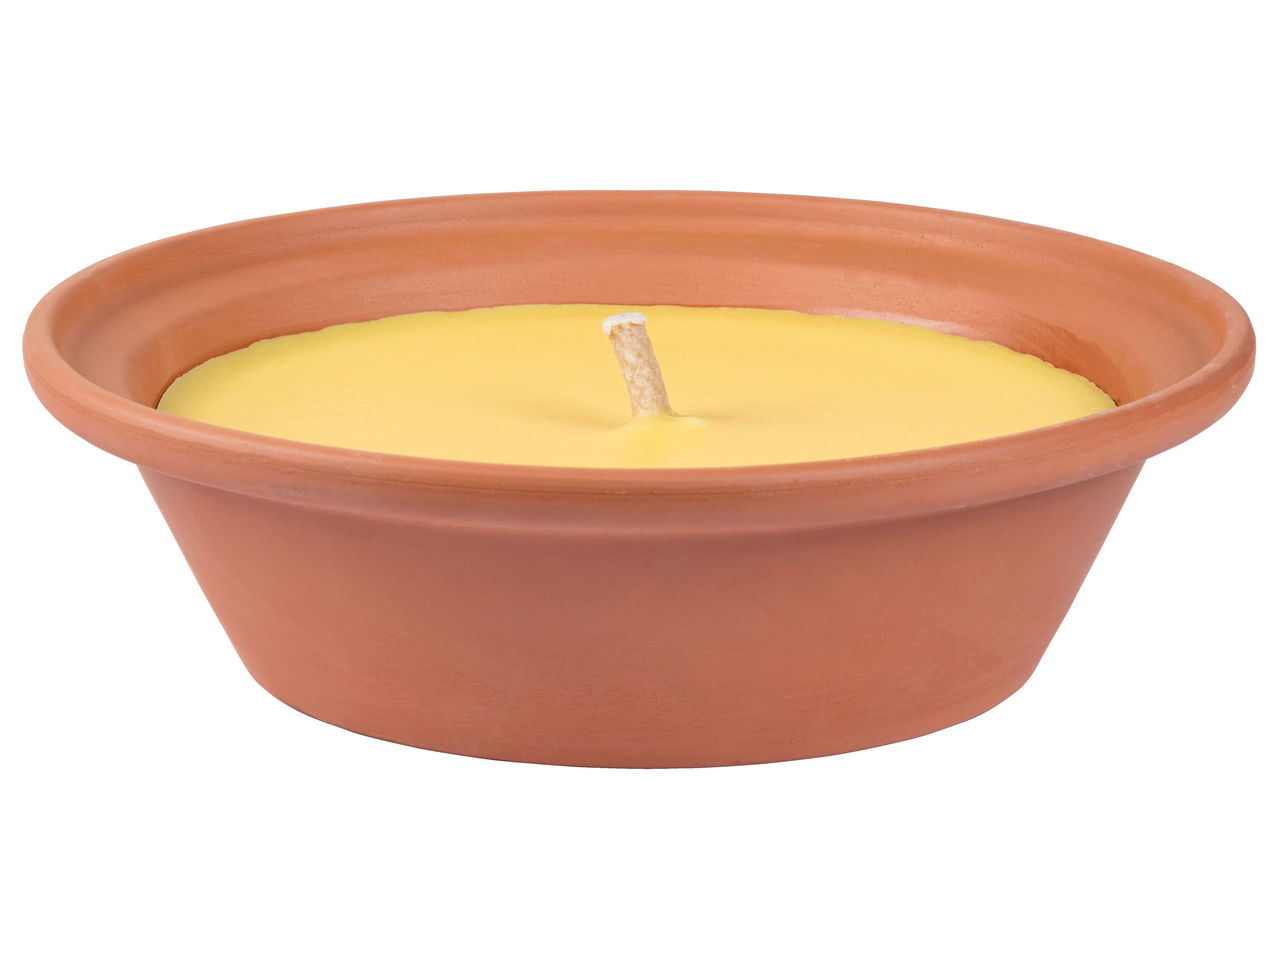 Candles in Ceramic Bowls